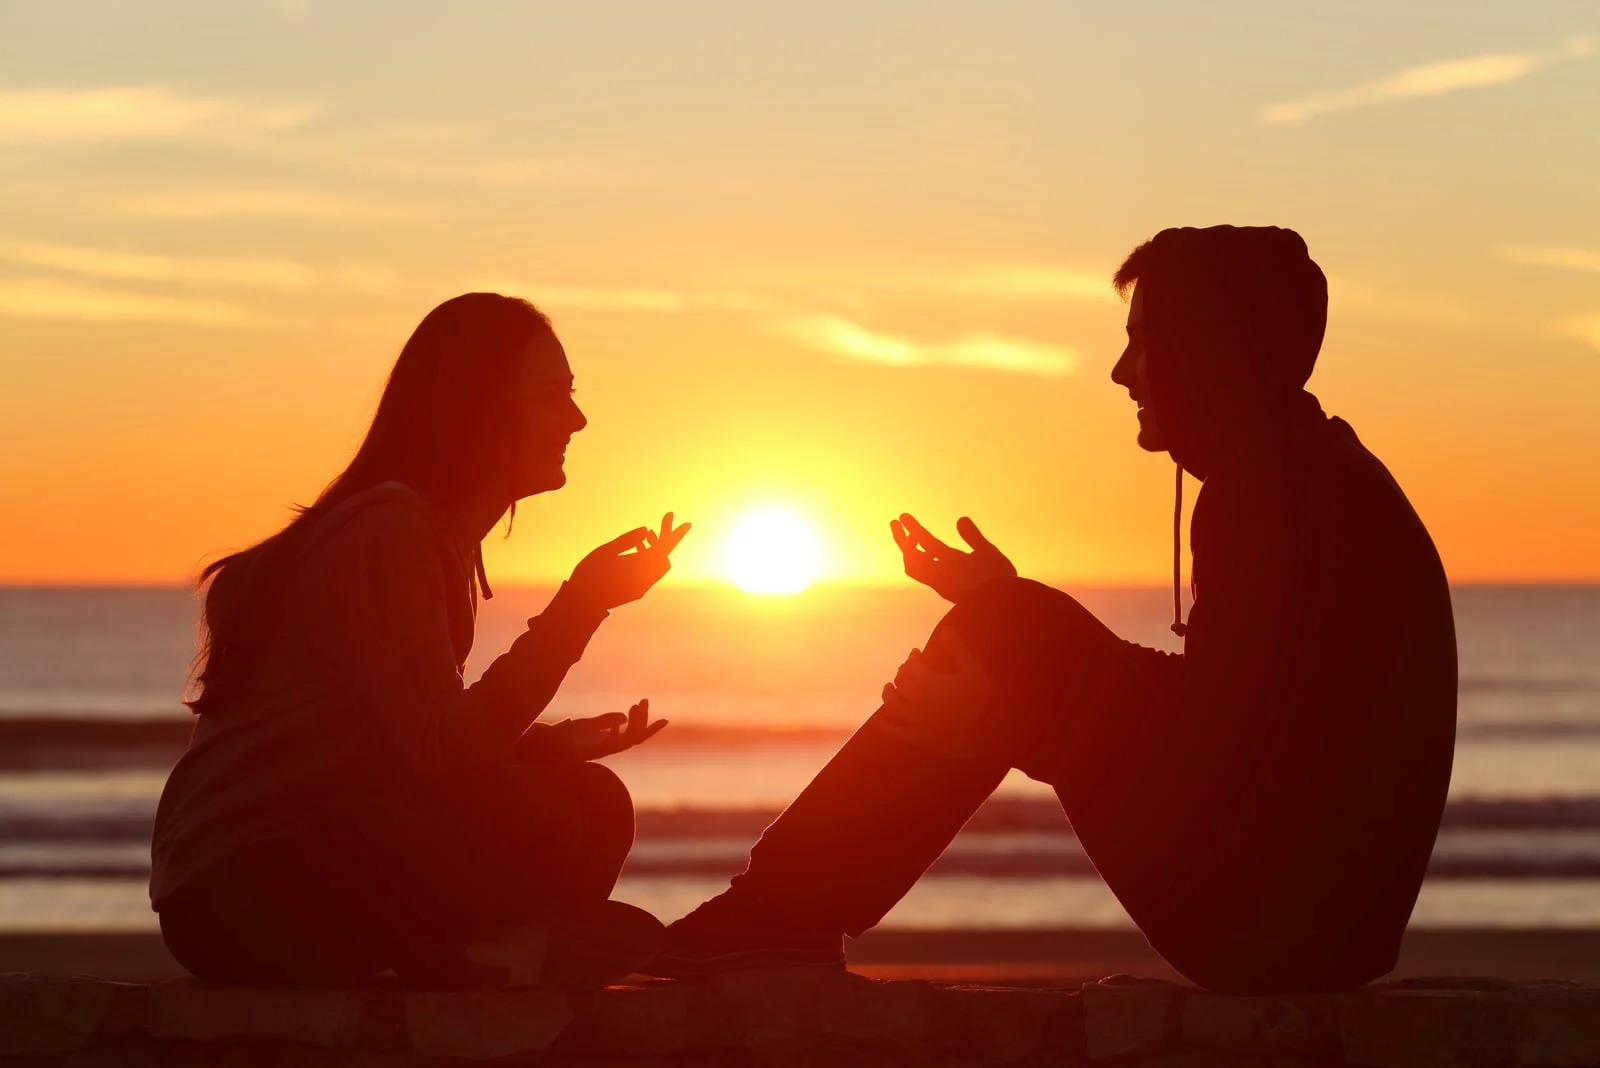 outside on a stone wall at sunset a man and a woman sit and talk